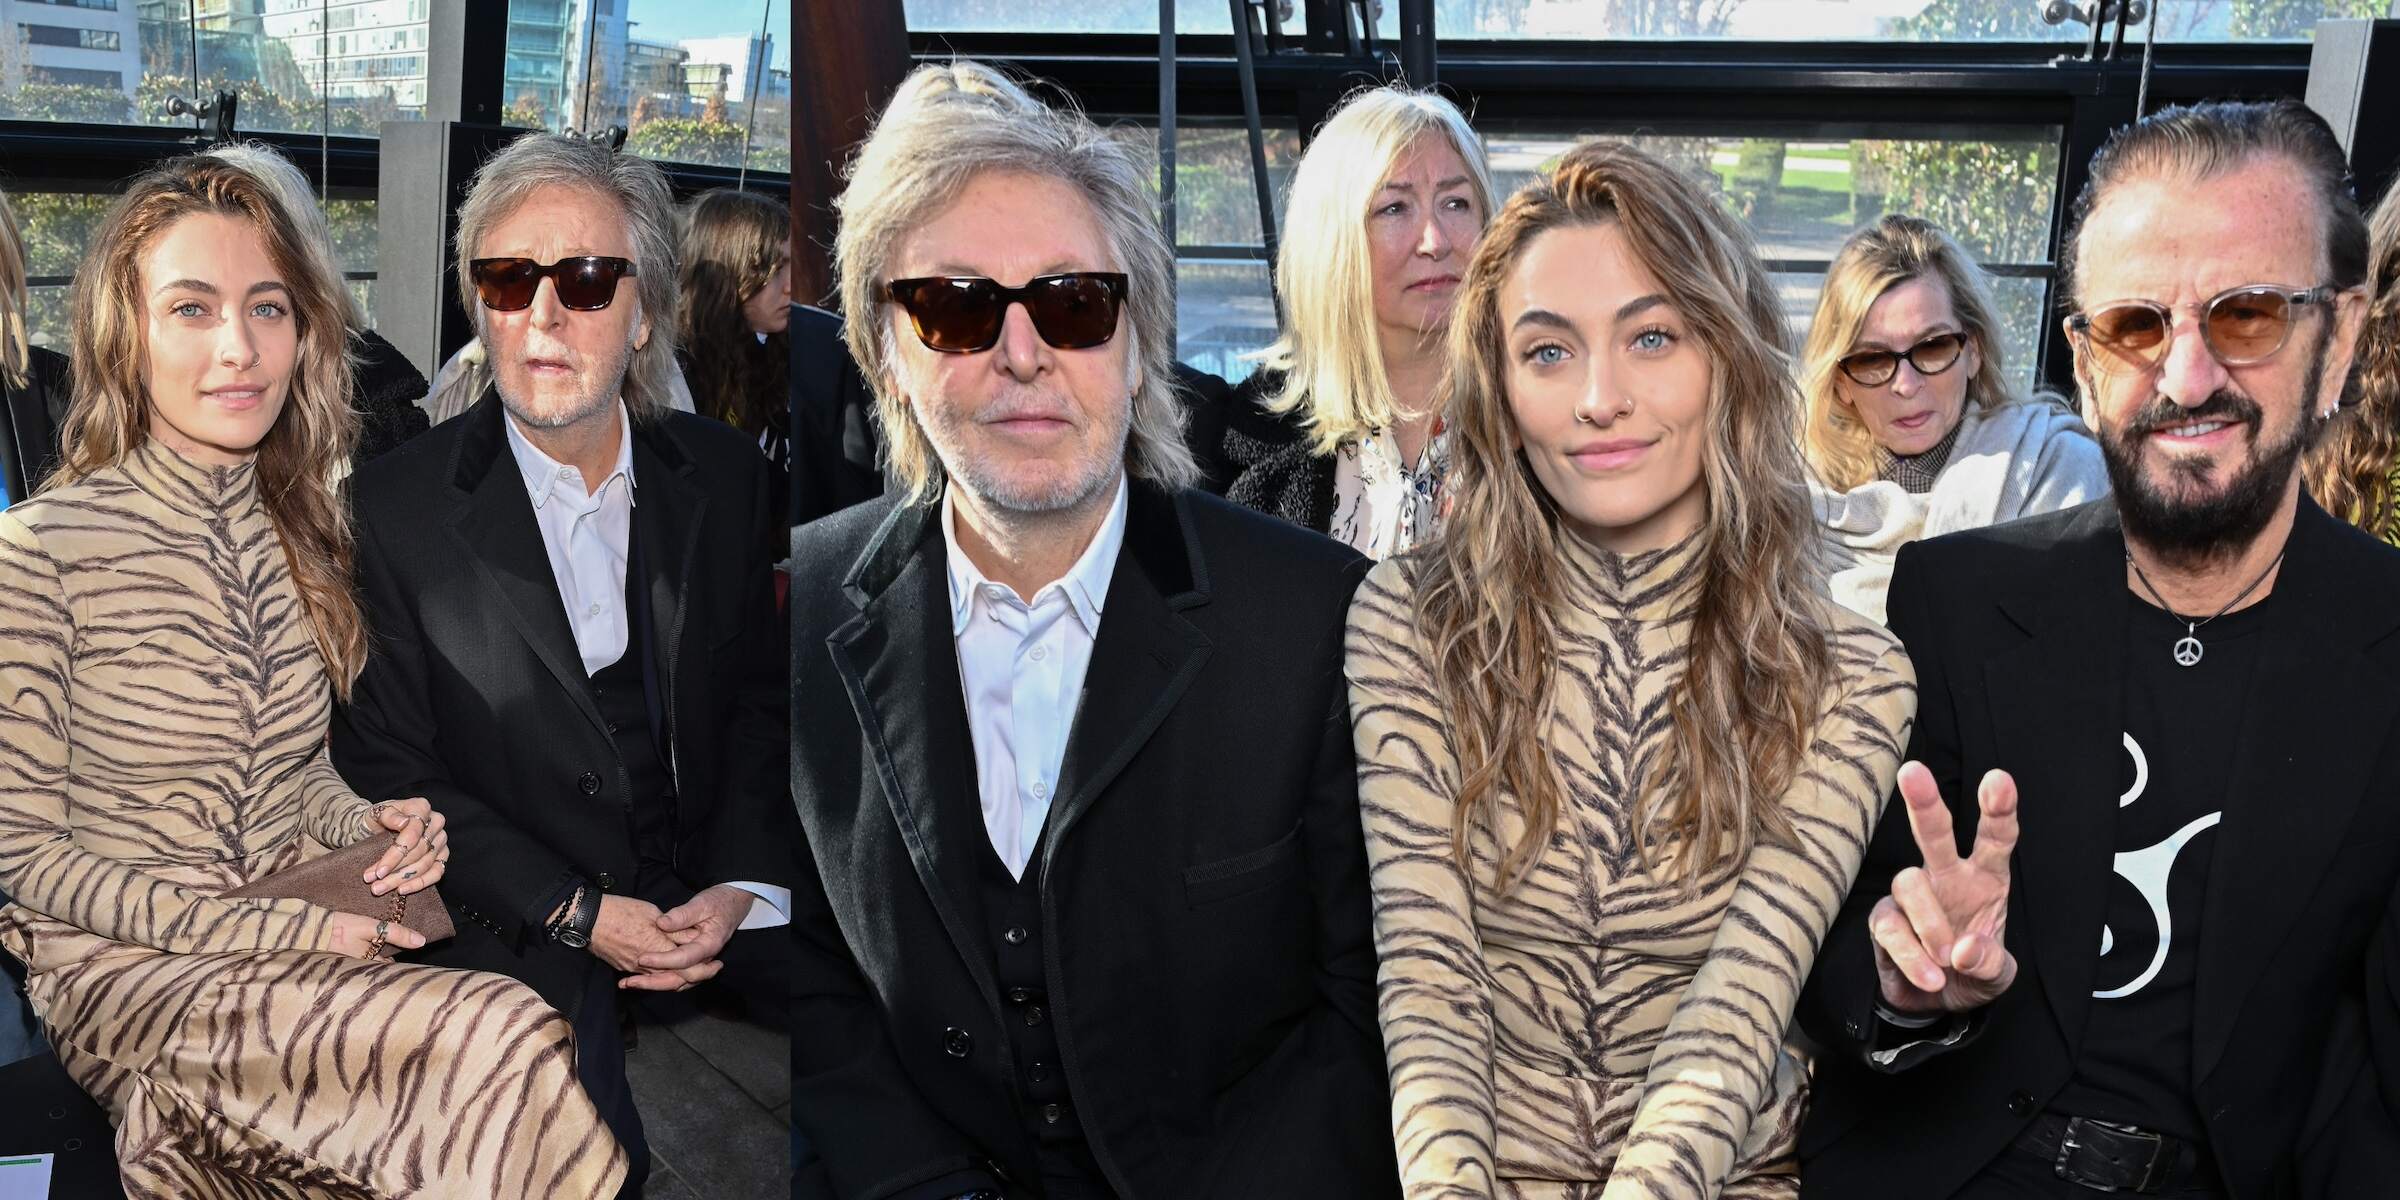 Paris Fashion Show attendees Sir Paul McCartney, Paris Michael Katherine Jackson, and Sir Ringo Starr sit front row together